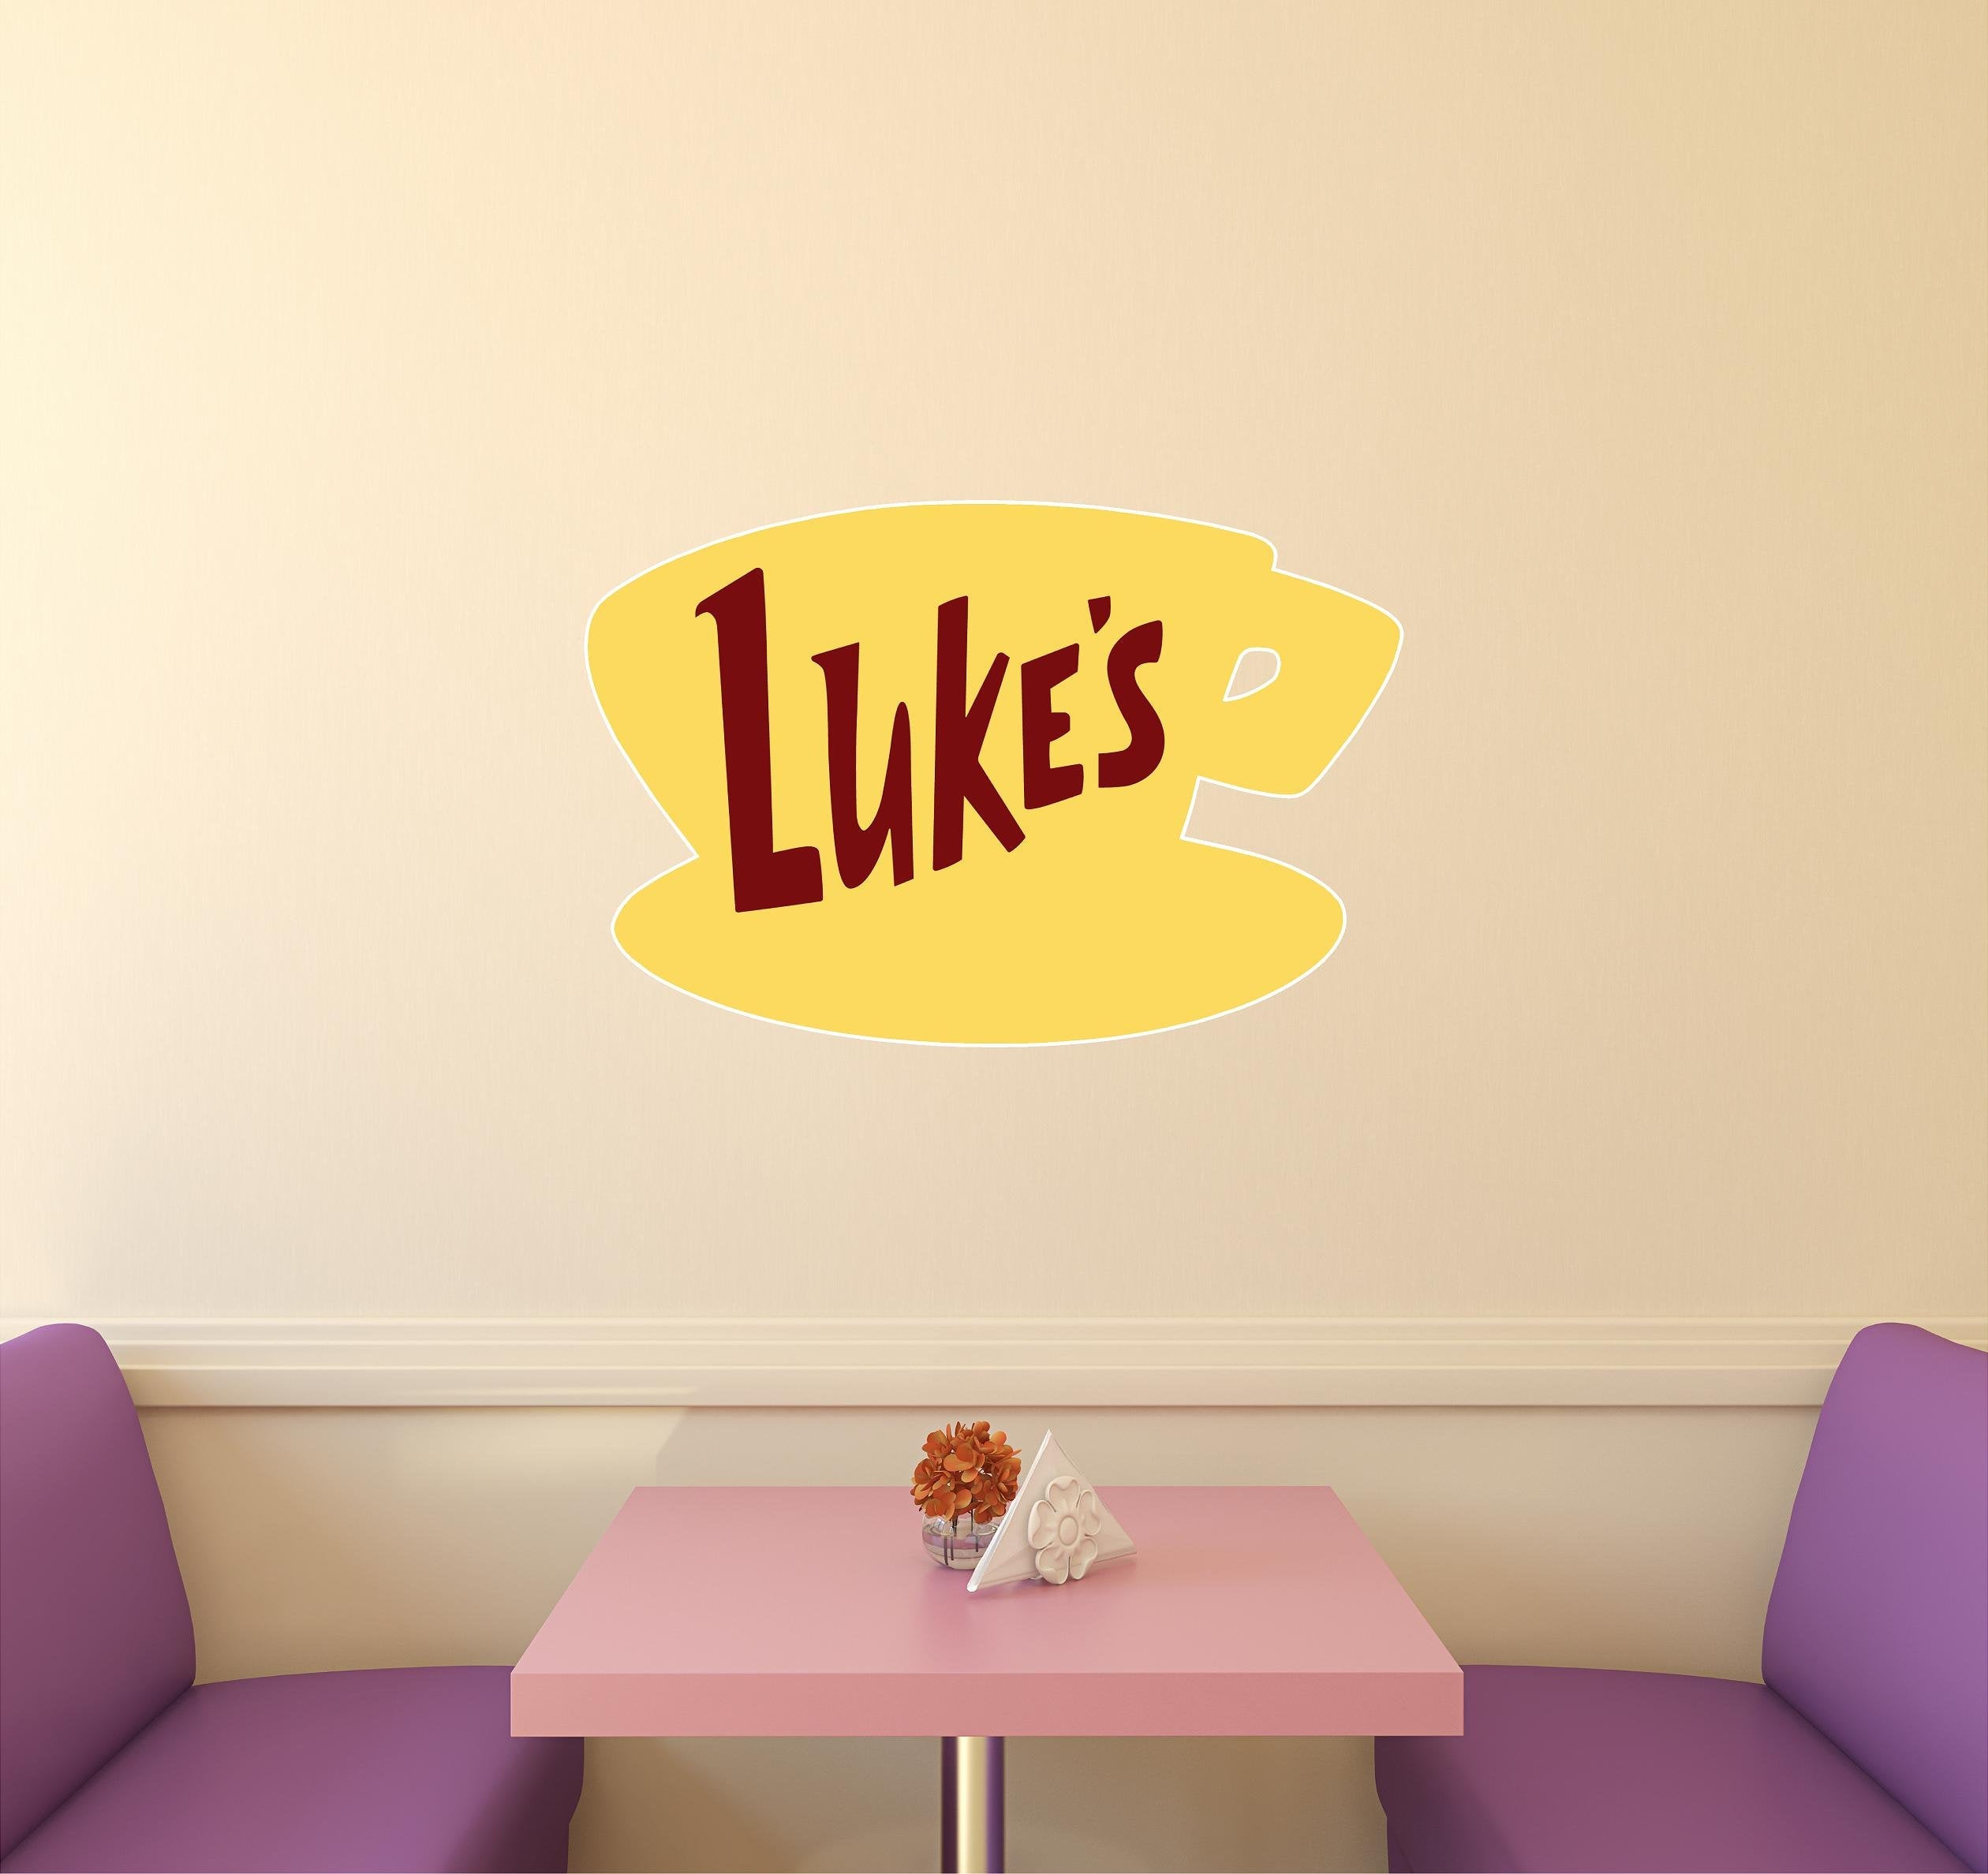 Luke's Diner Gilmore Girls Wall Decal Coffee Shop Logo Removable Fabric Vinyl Wall Sticker